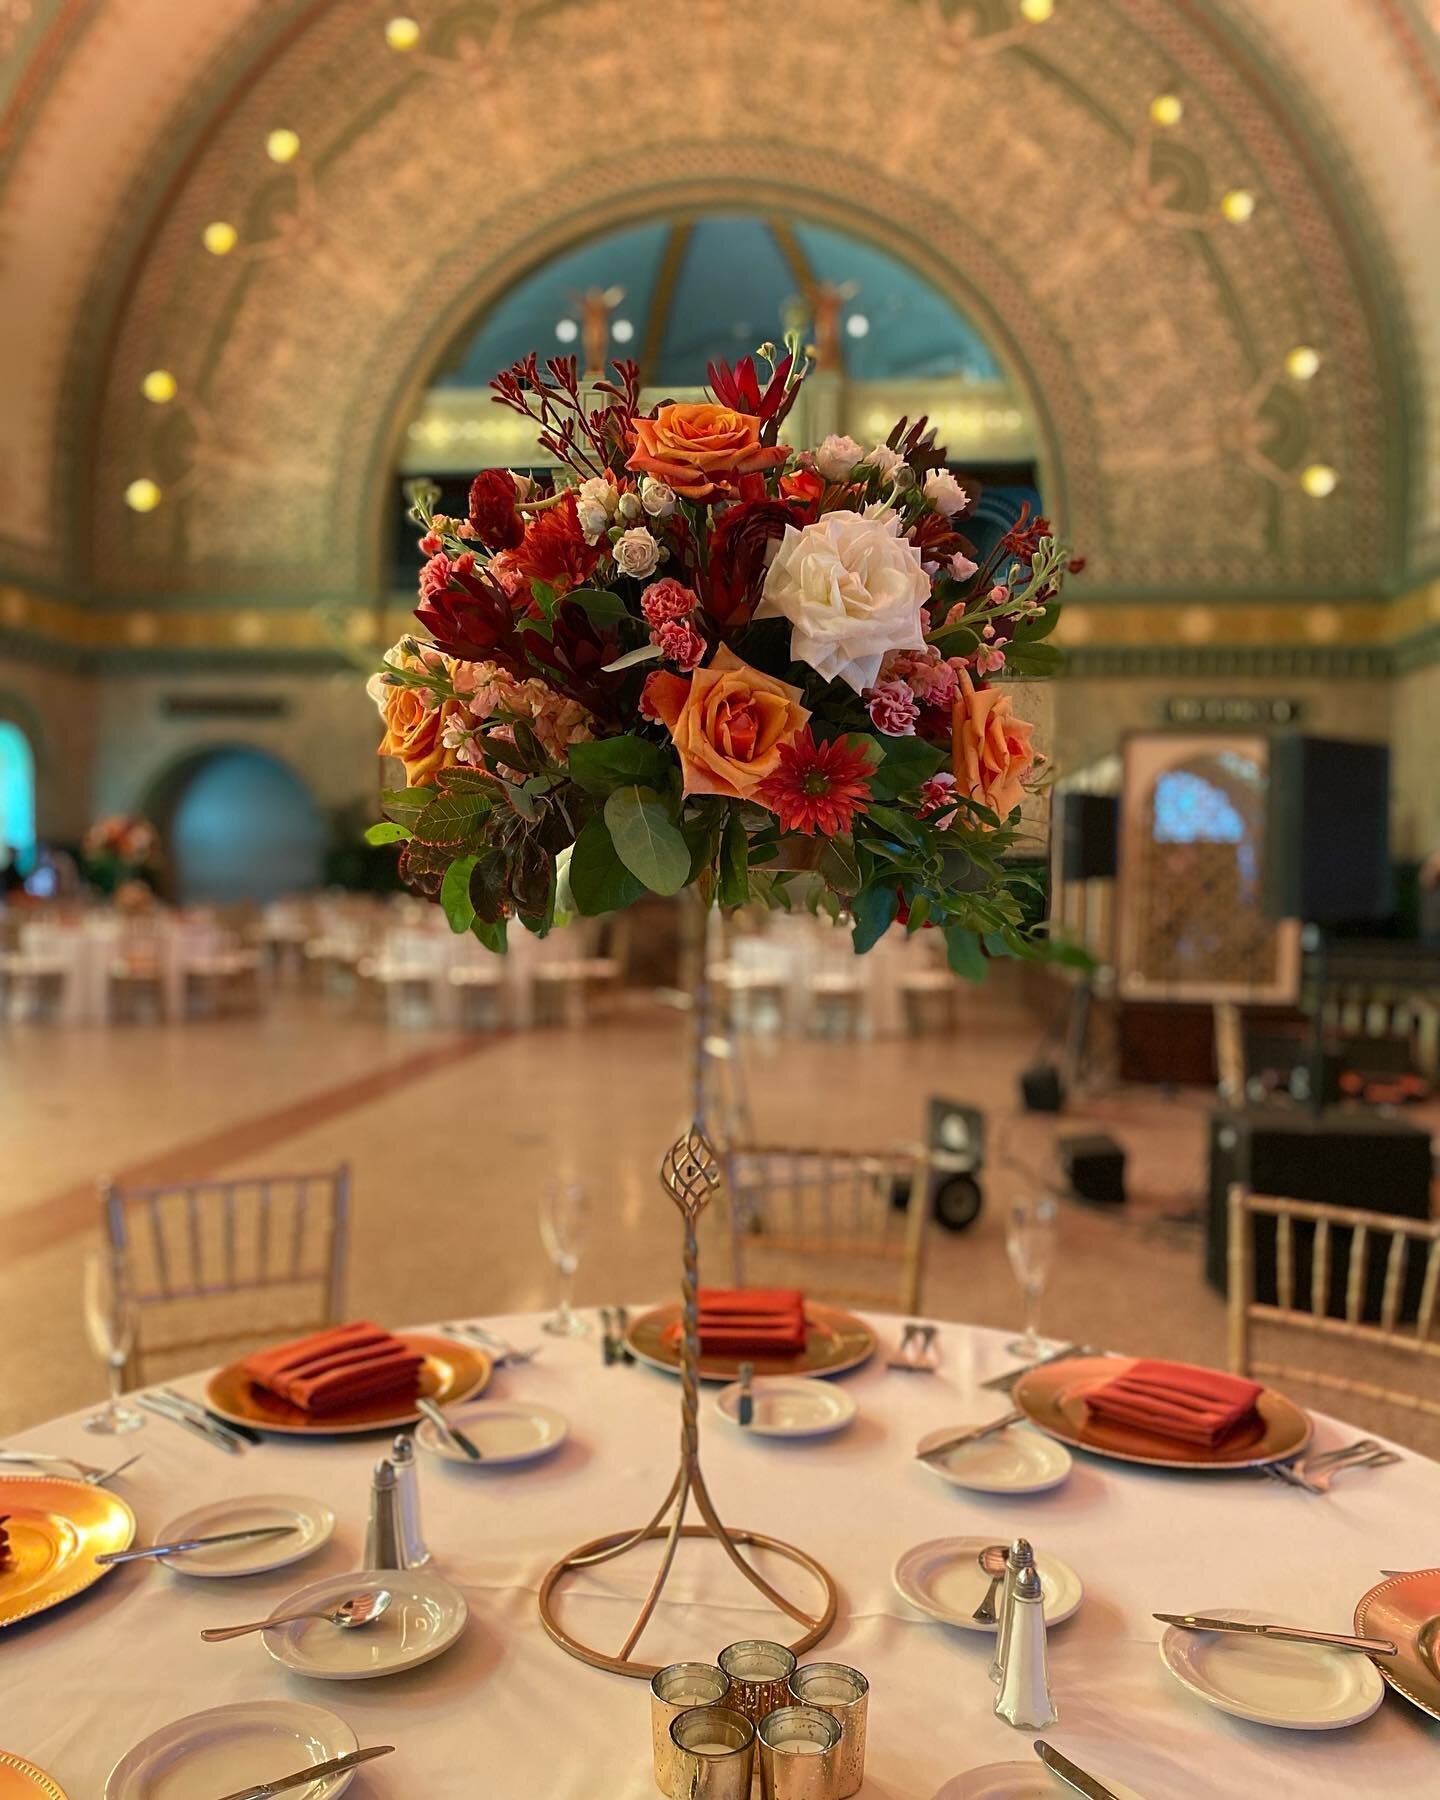 My daughter, Elisabeth, did an amazing job with this wedding! The colors were so right on and Union Station is THE most gorgeous venue! I enjoyed helping 😉